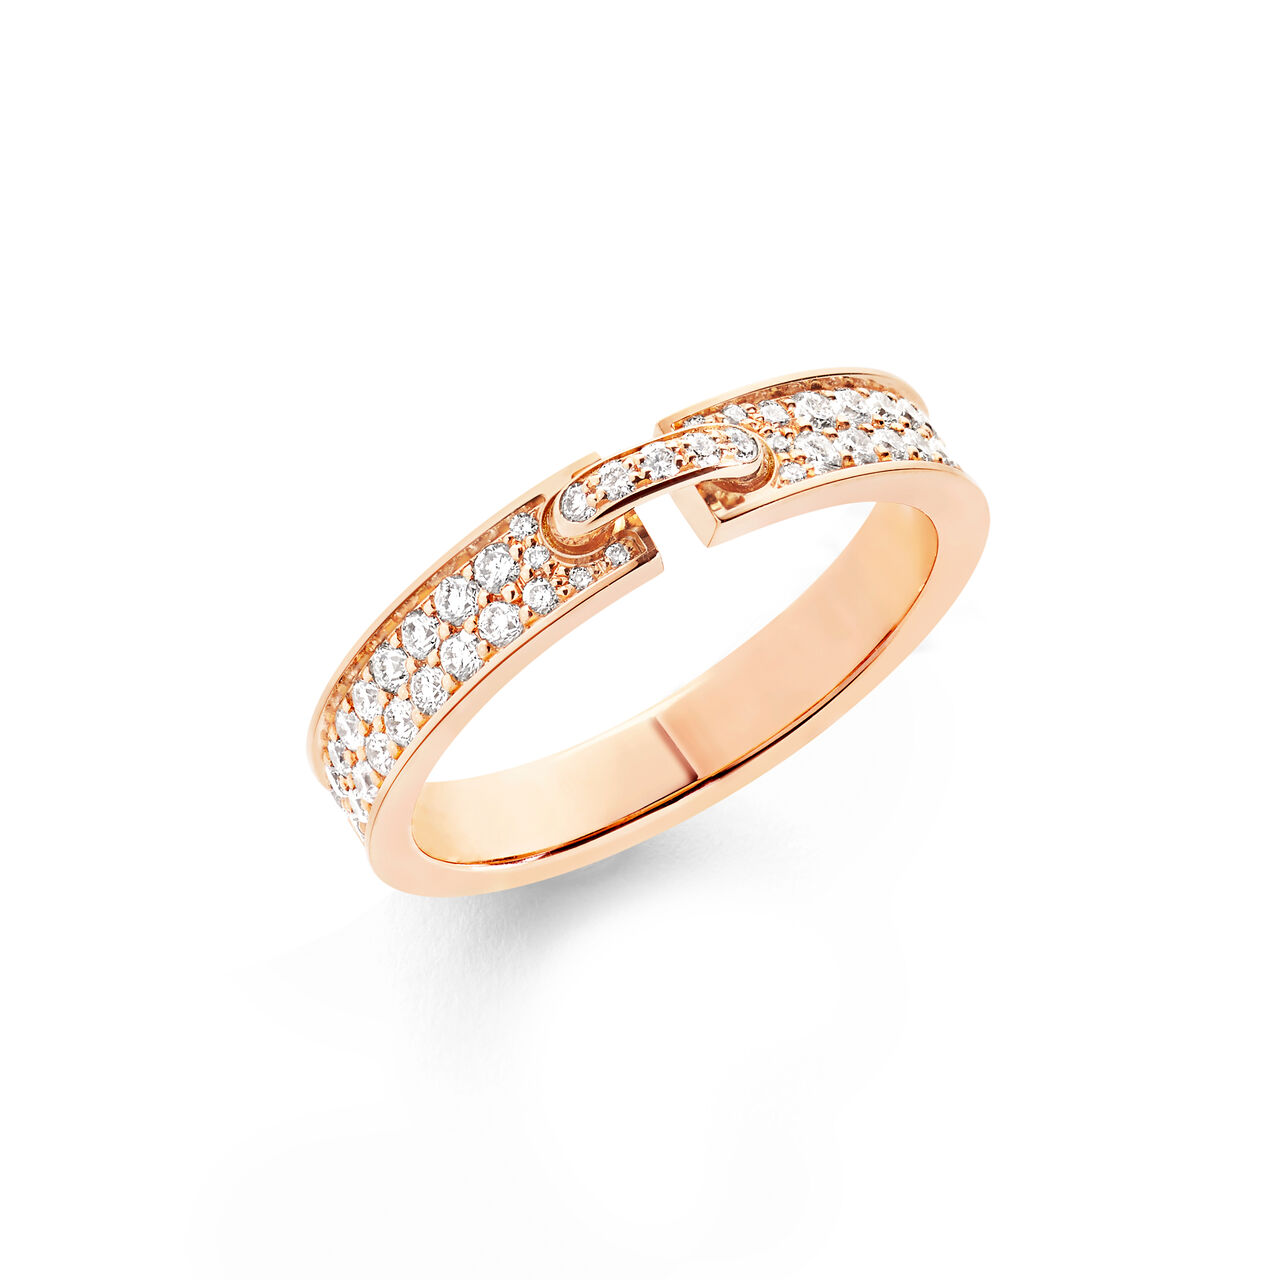 maison birks chaumet liens evidence rose gold diamond pave ring 083605 image number 0